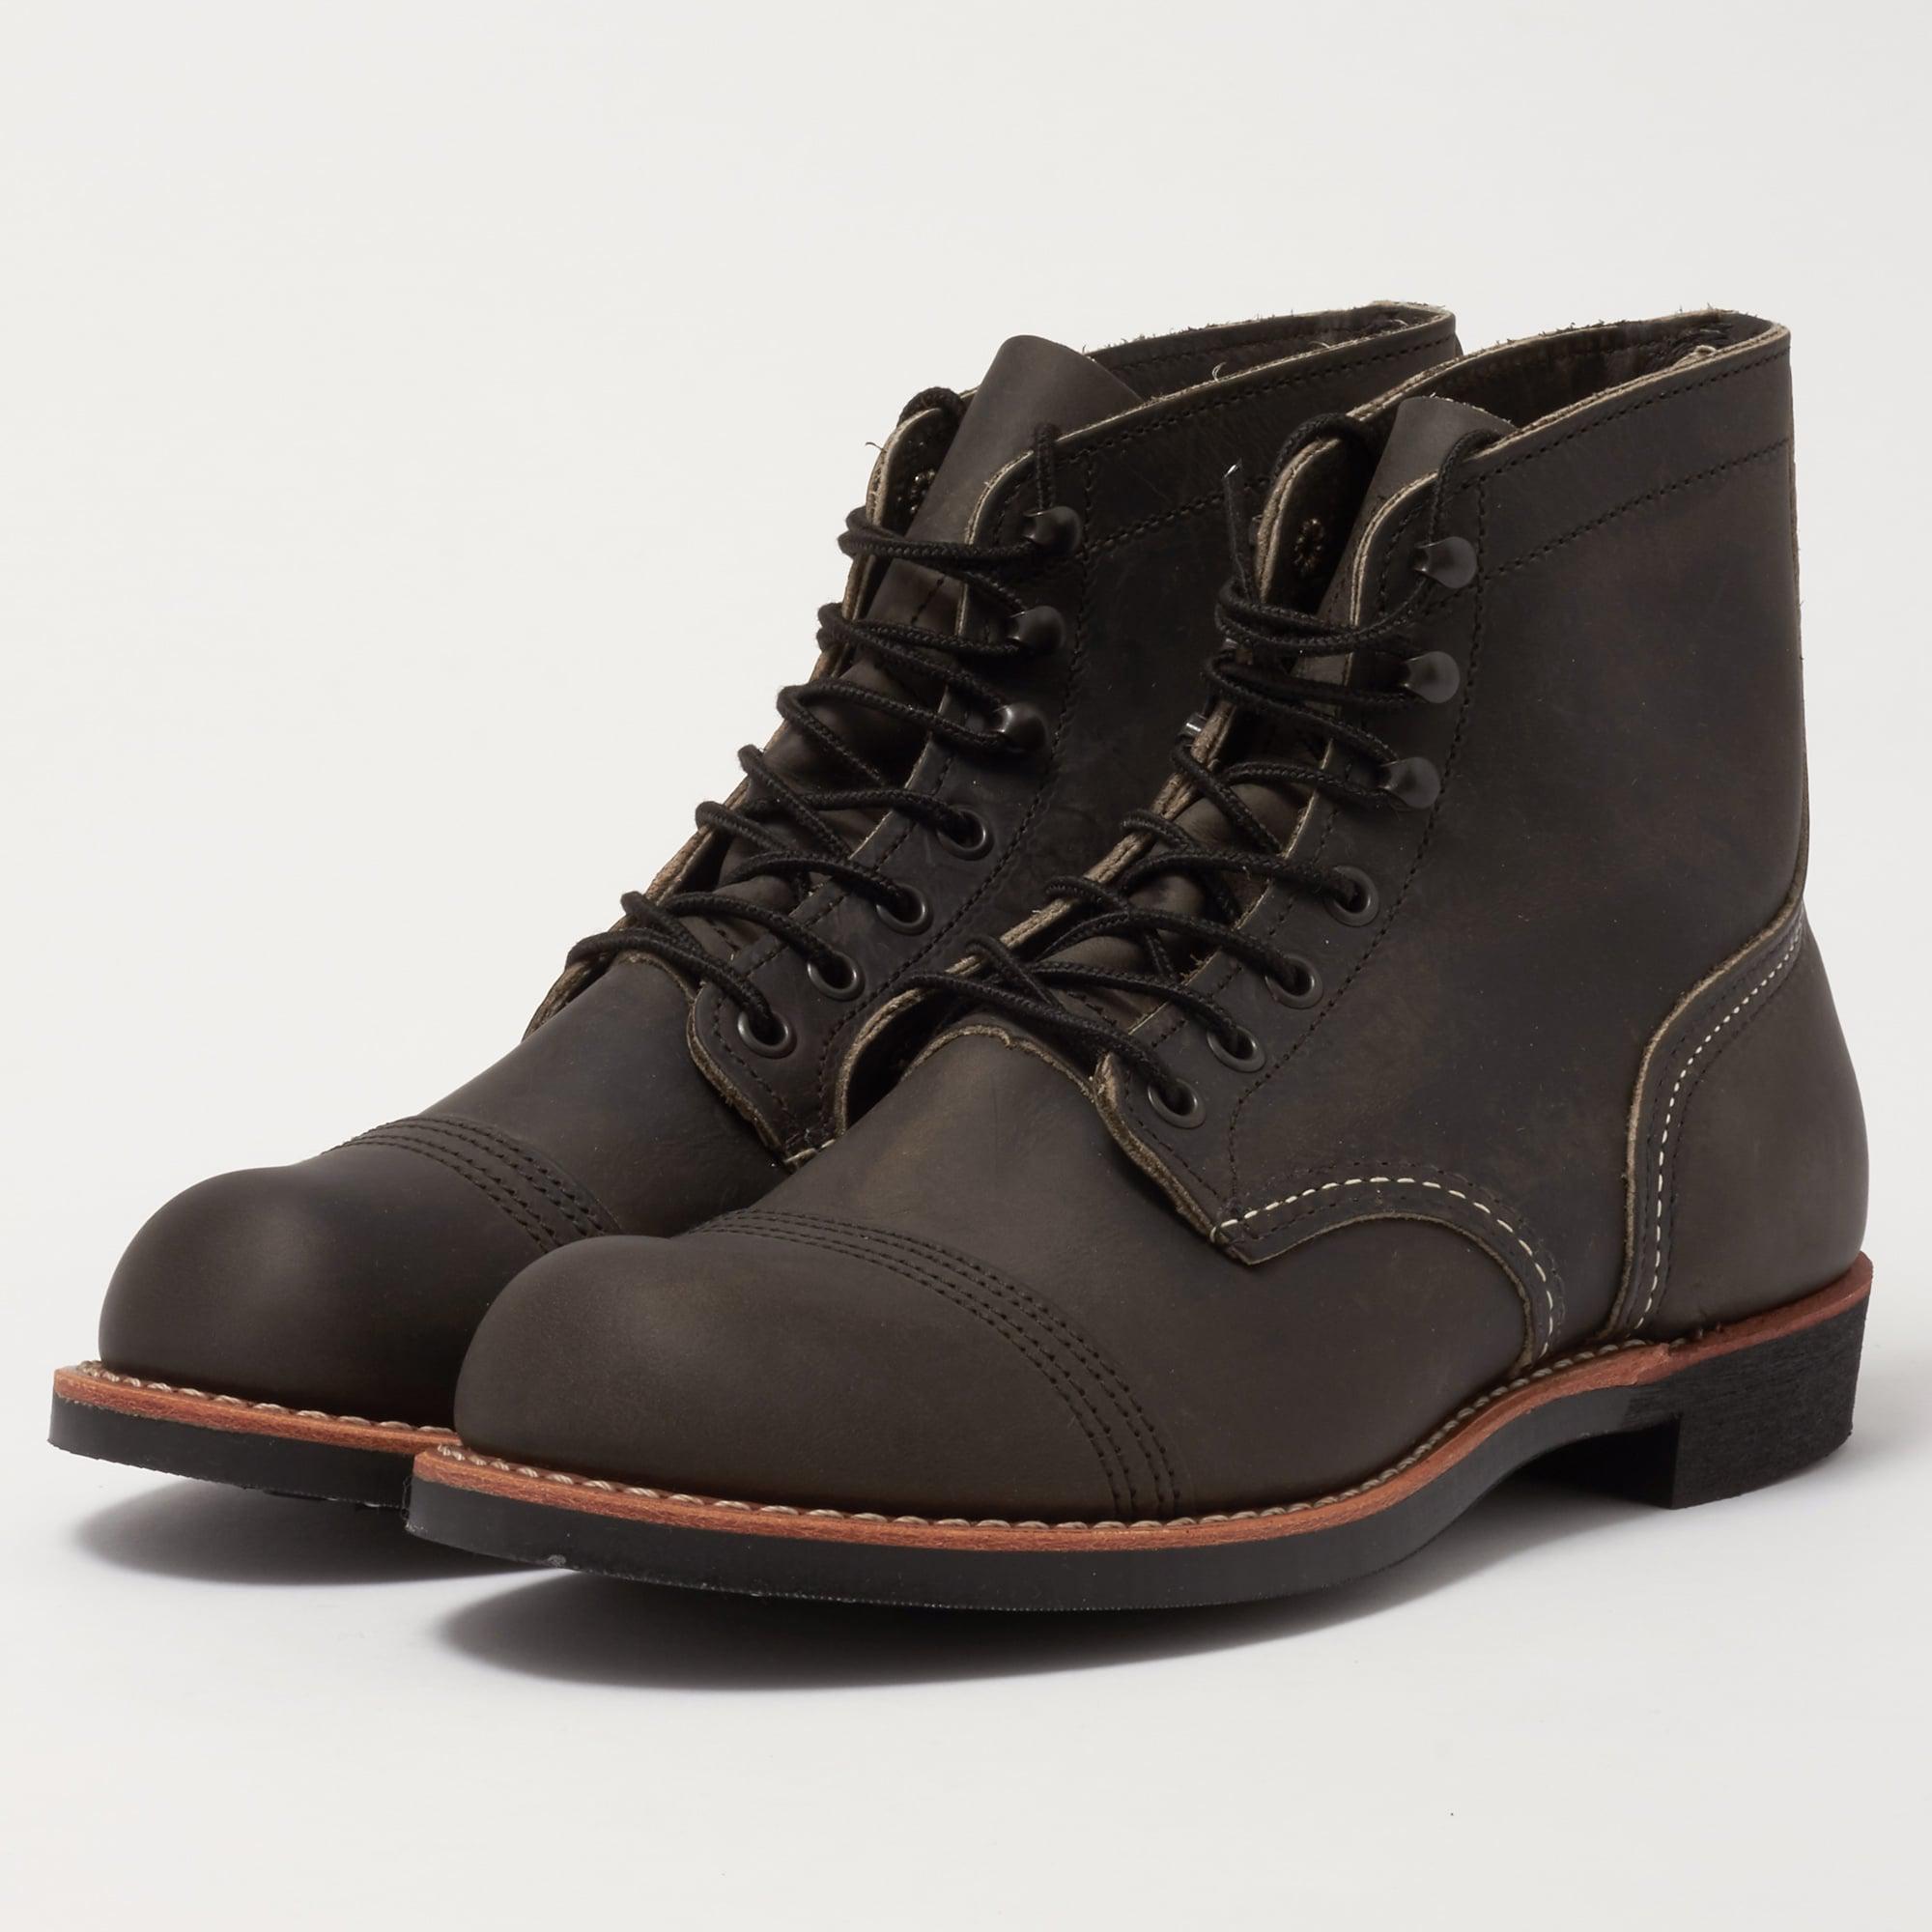 Lyst - Red Wing 8086 Iron Ranger Boot - Charcoal for Men